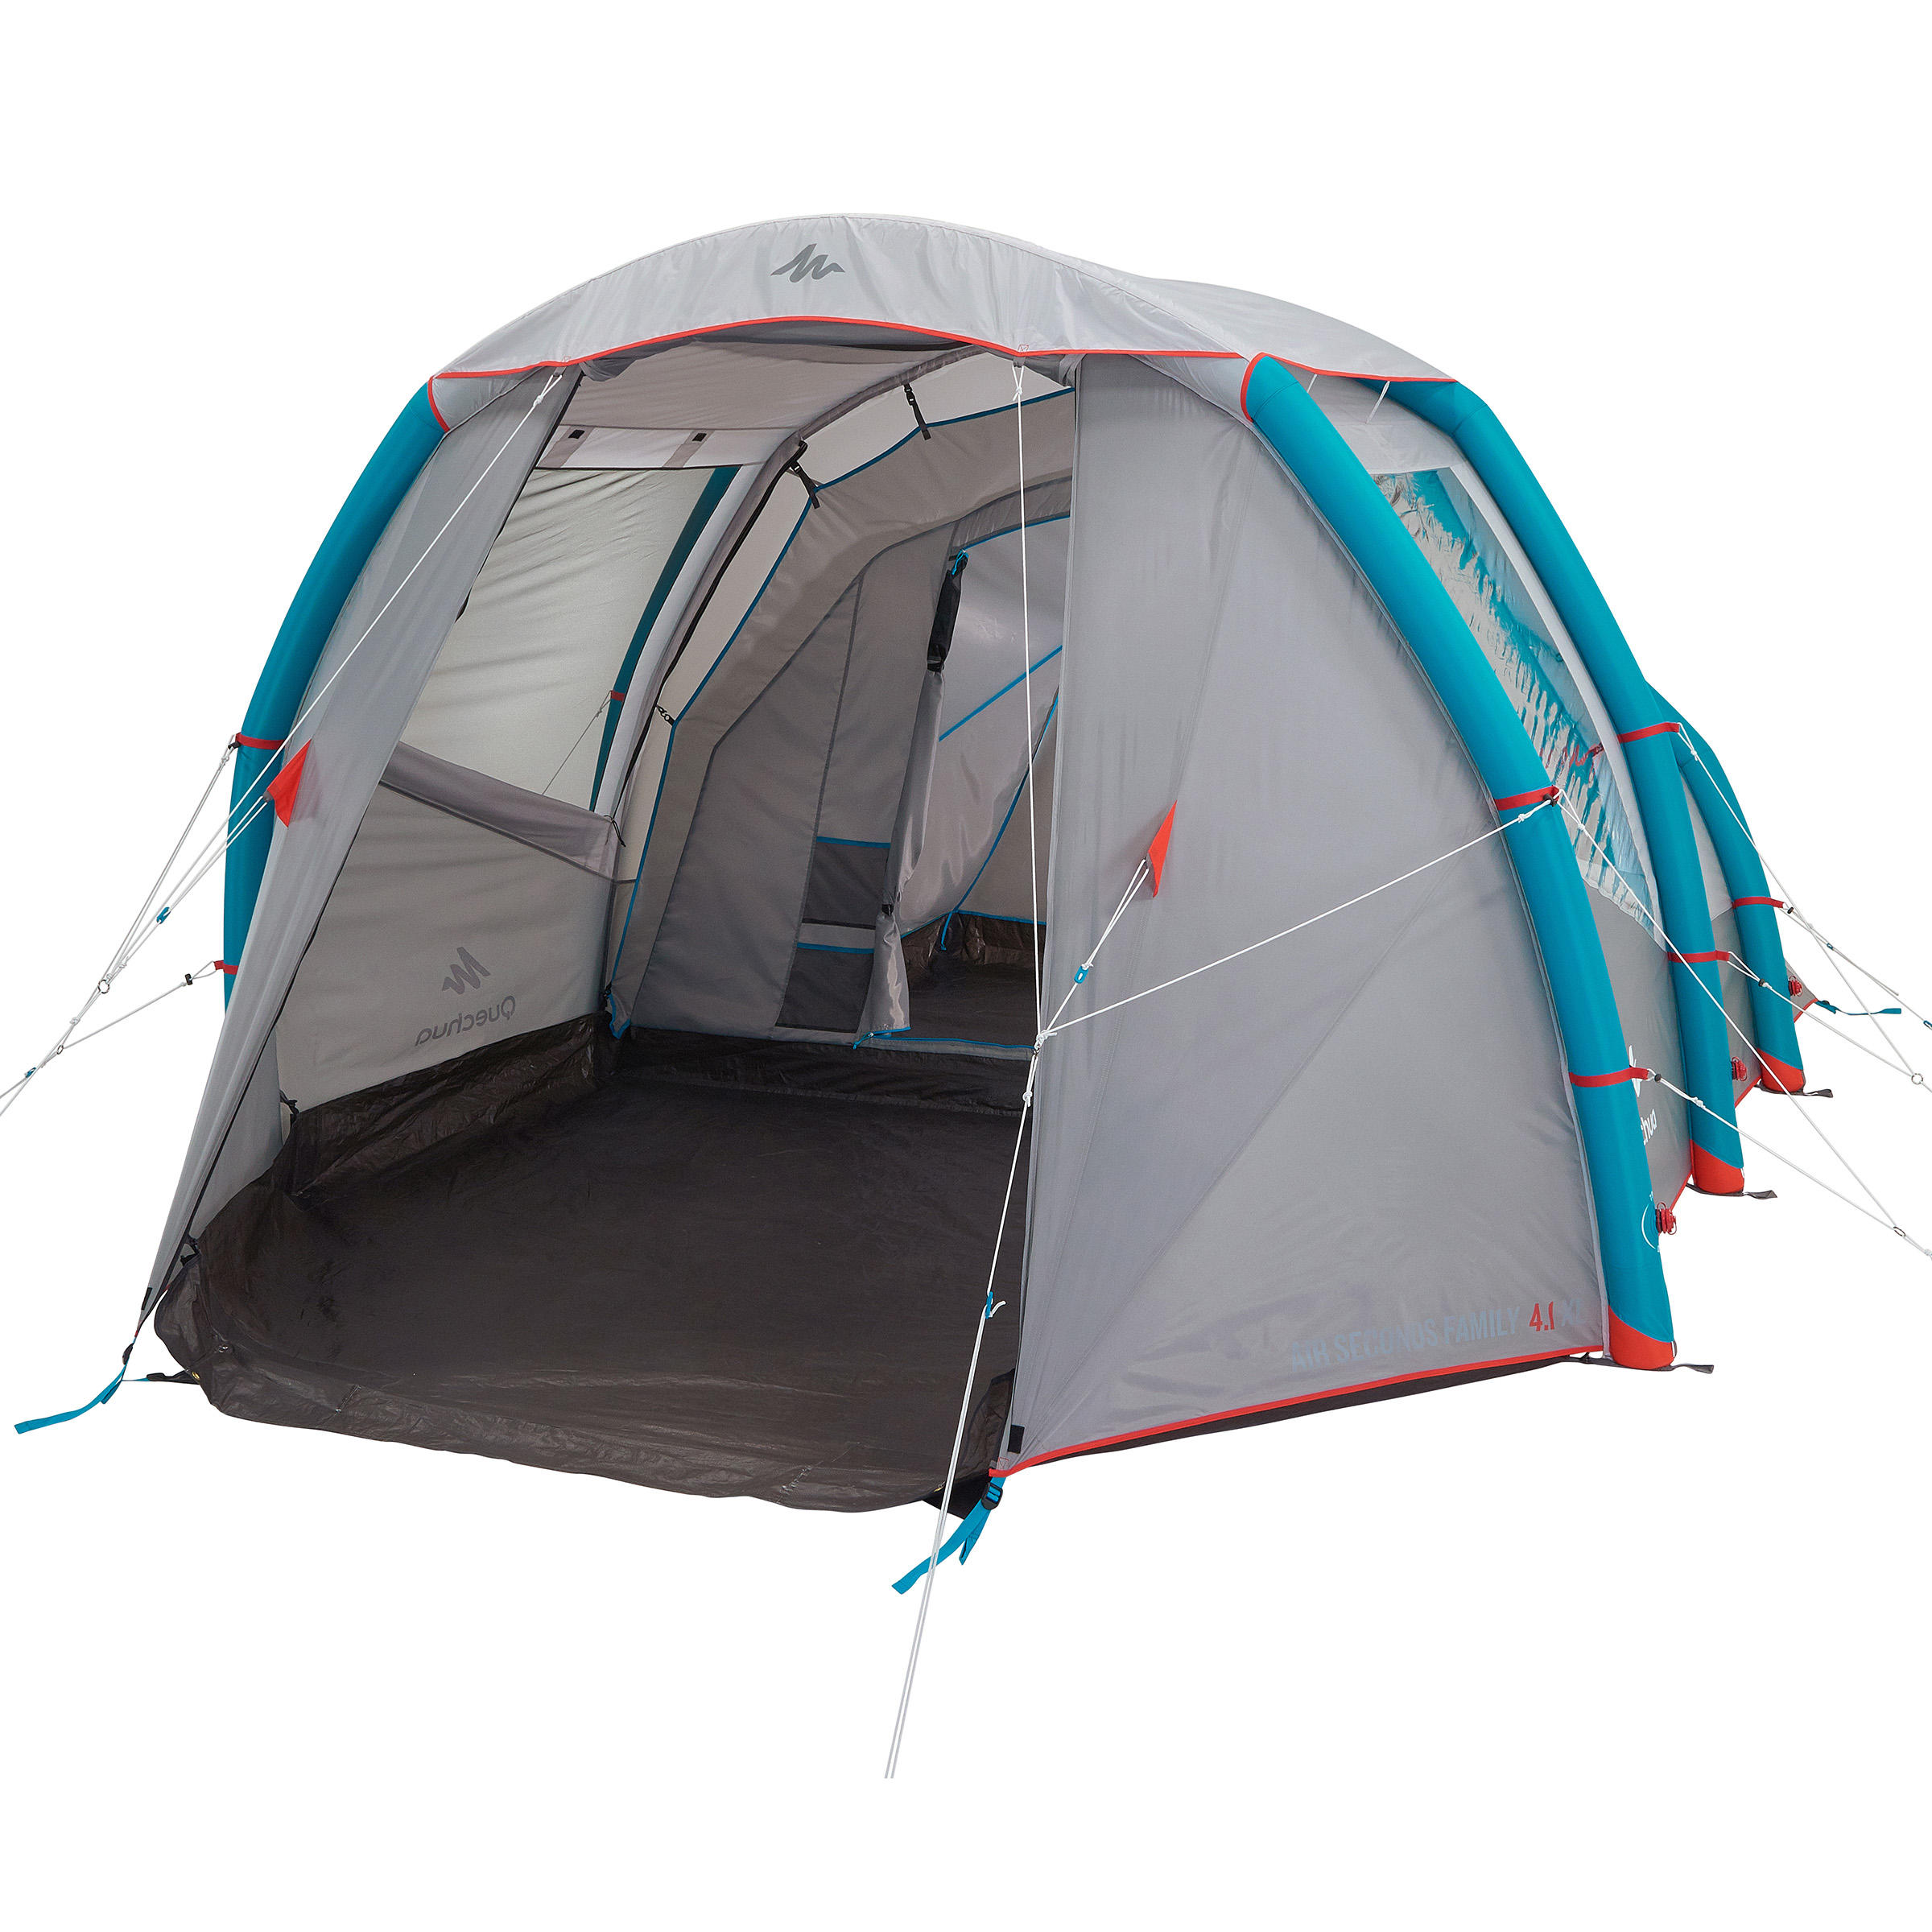 Inflatable camping tent - Air Seconds 4 